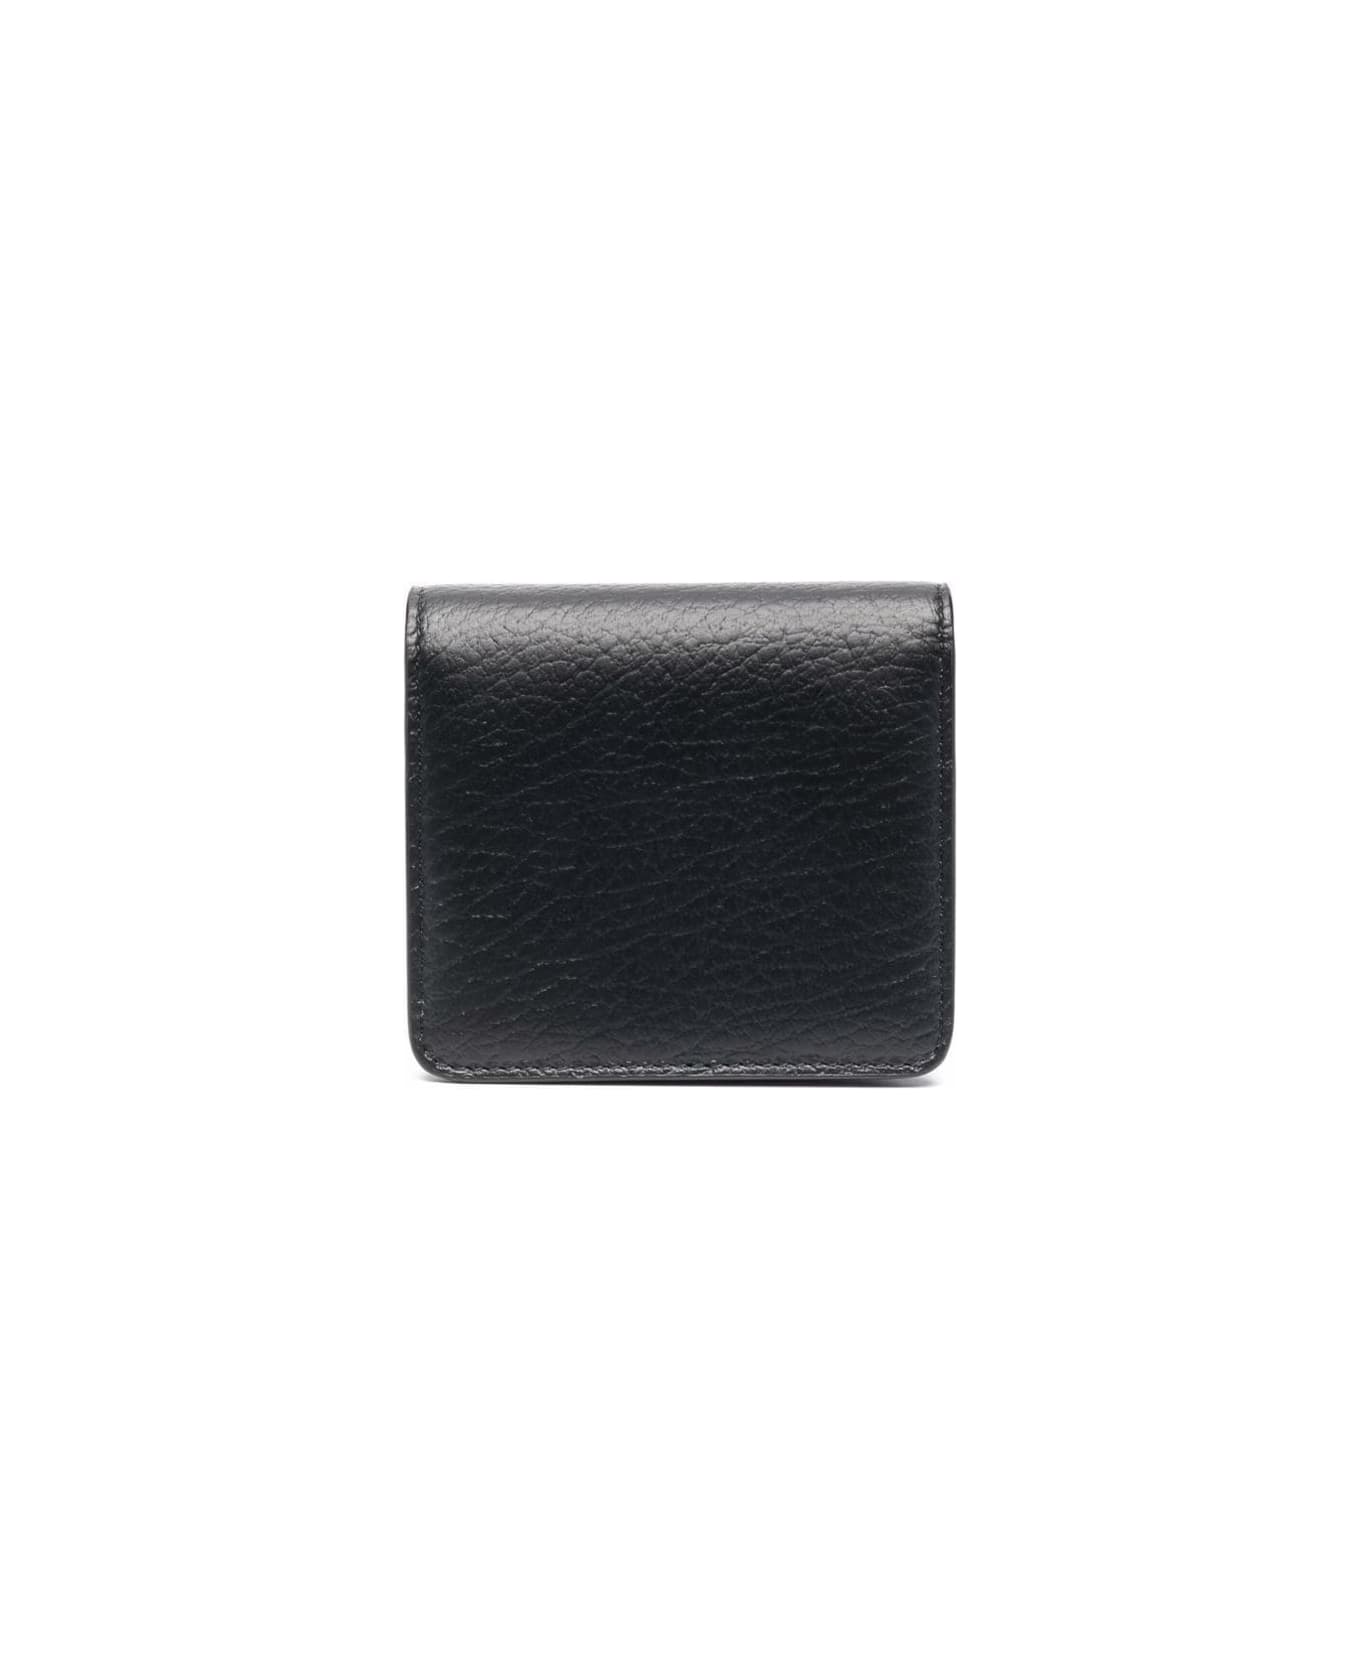 Maison Margiela Black Wallet With Silver-tone Chain And Stitching Detail In Leather Woman - Black